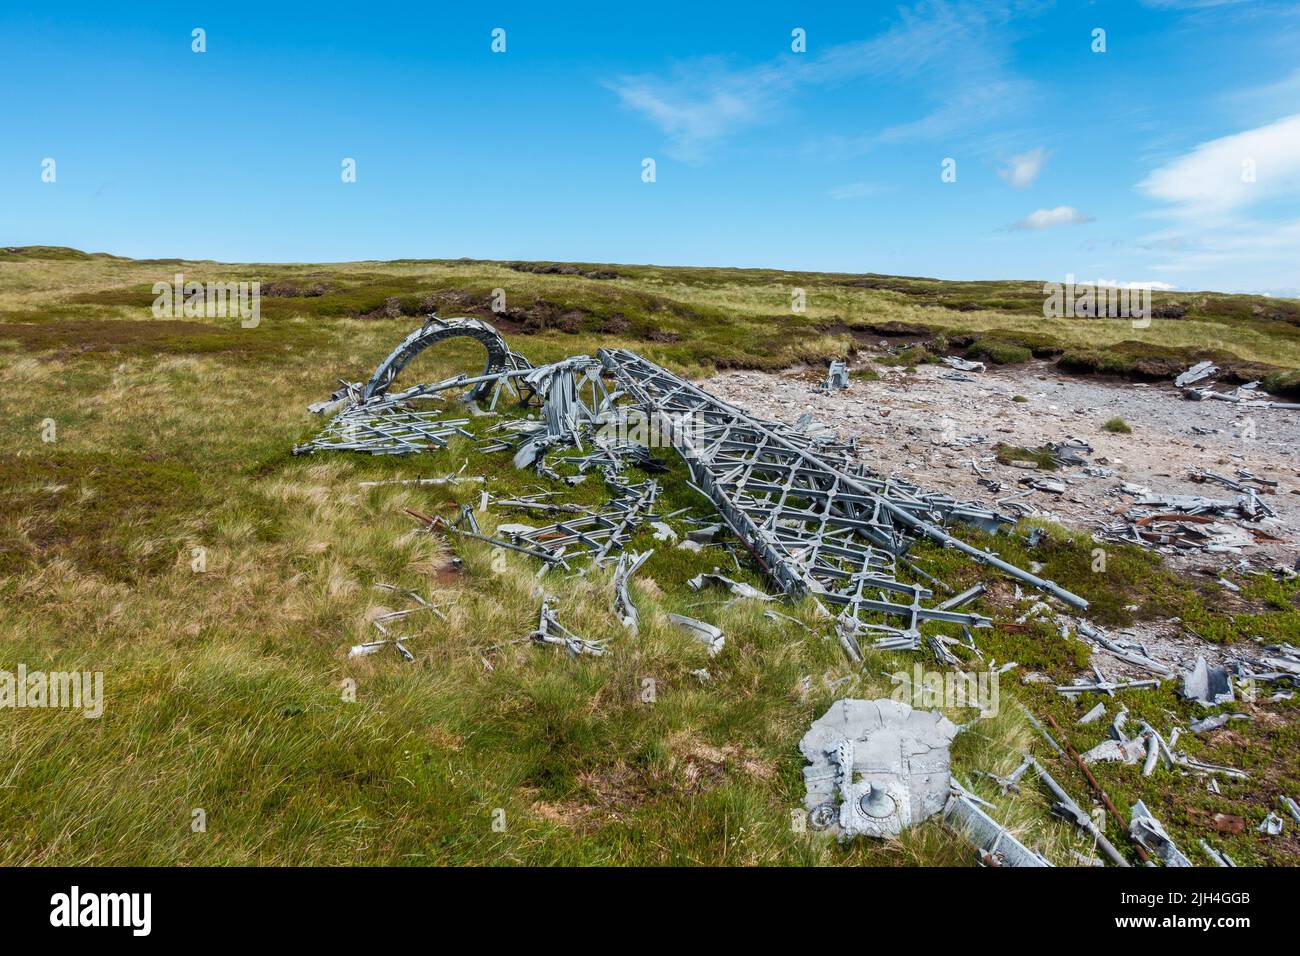 Vickers Wellington bomber wreckage that crashed in 1942 on the hill near Ben Tirran in Glen Clova, Angus, Scotland, with the geodetic airframe visible Stock Photo